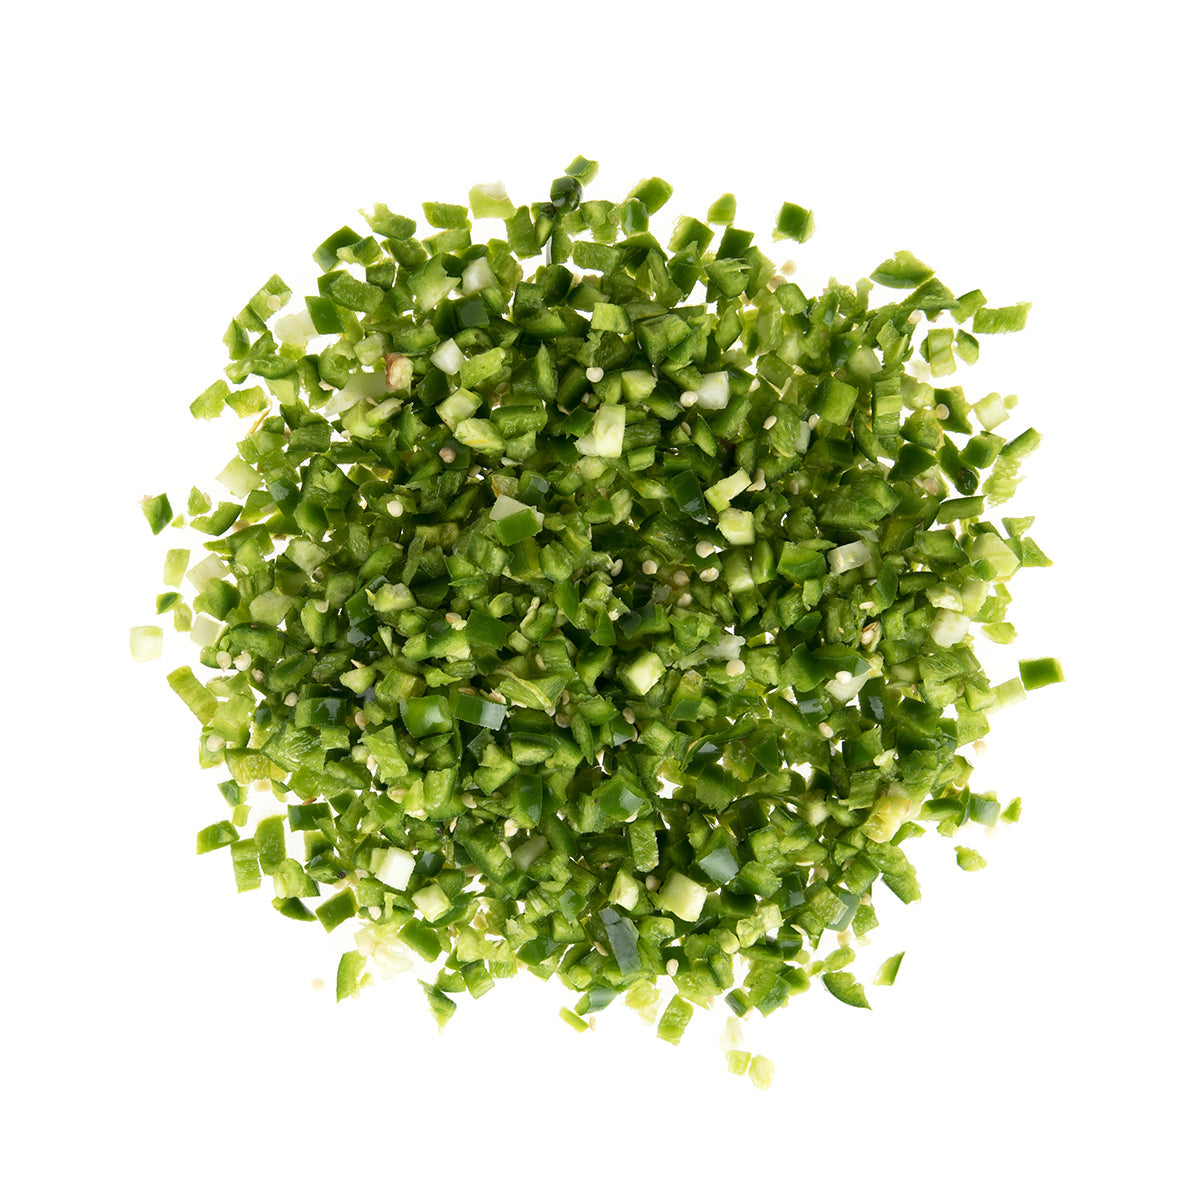 BoxNCase 1/4 Diced Jalapeno Peppers 5 LB